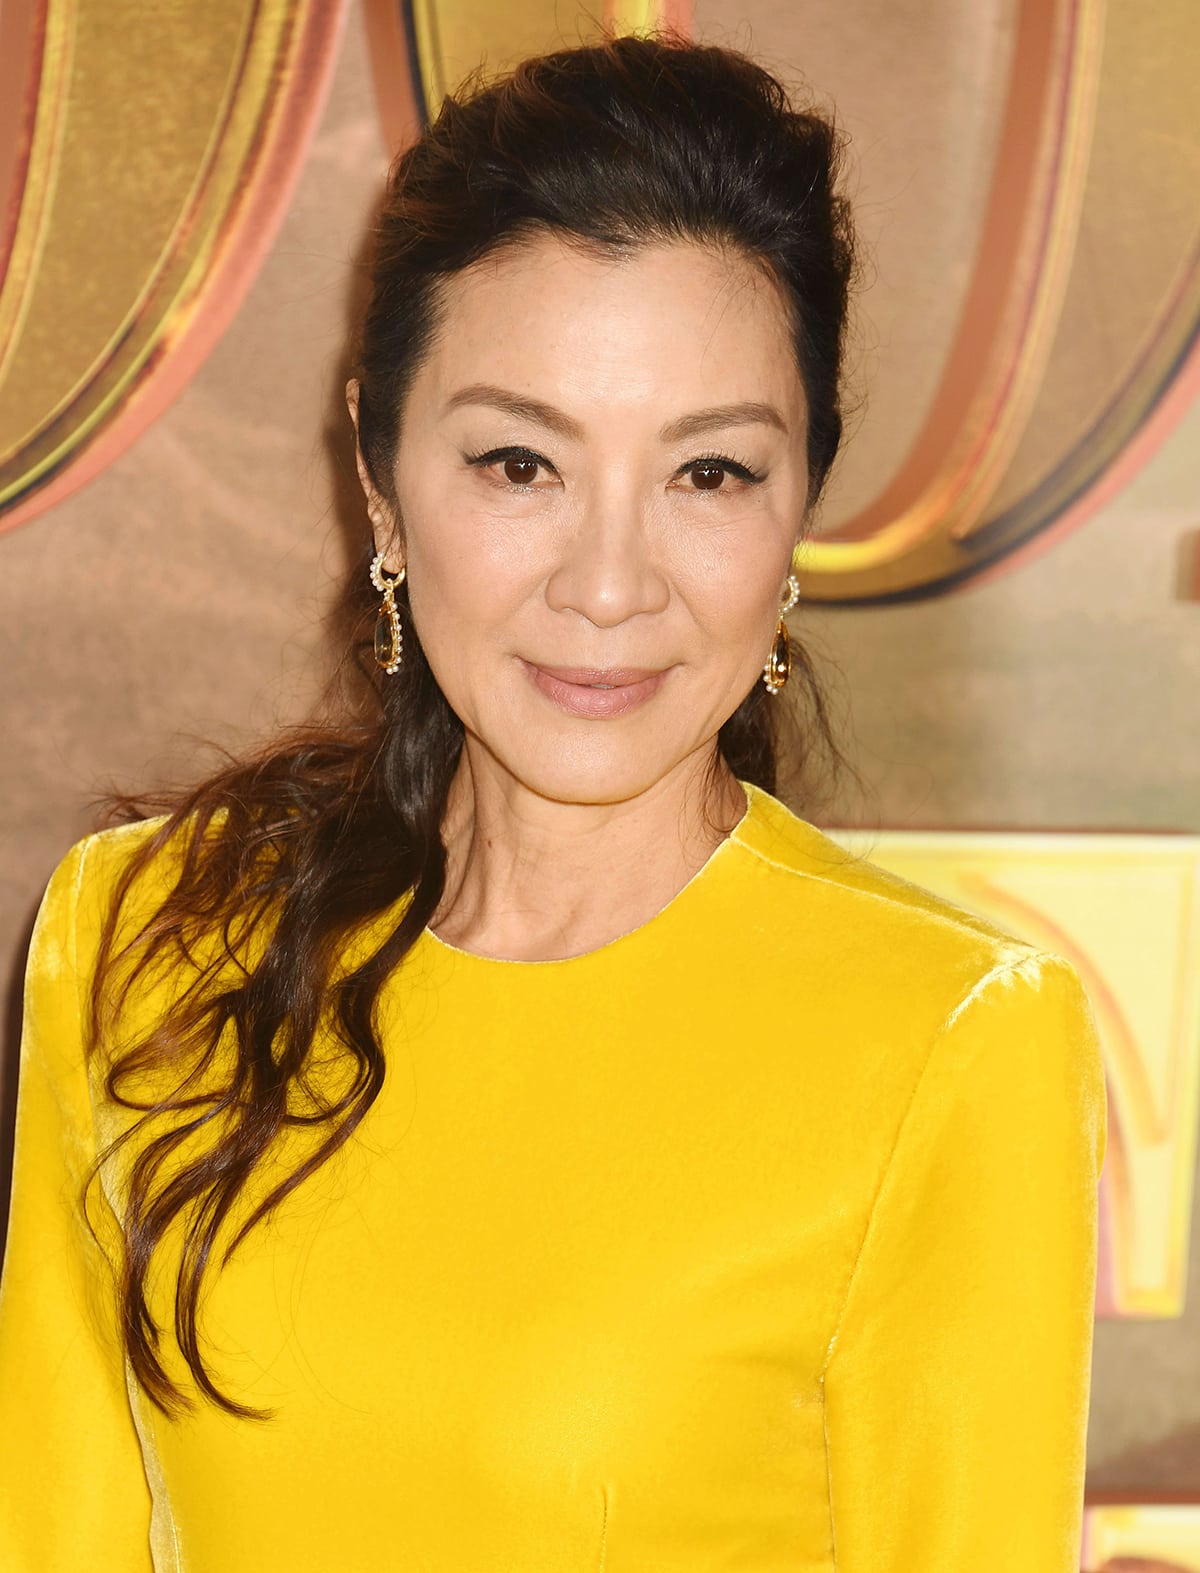 Michelle Yeoh sweeps her tresses into a wavy ponytail and highlights her eyes with cat-eyeliner